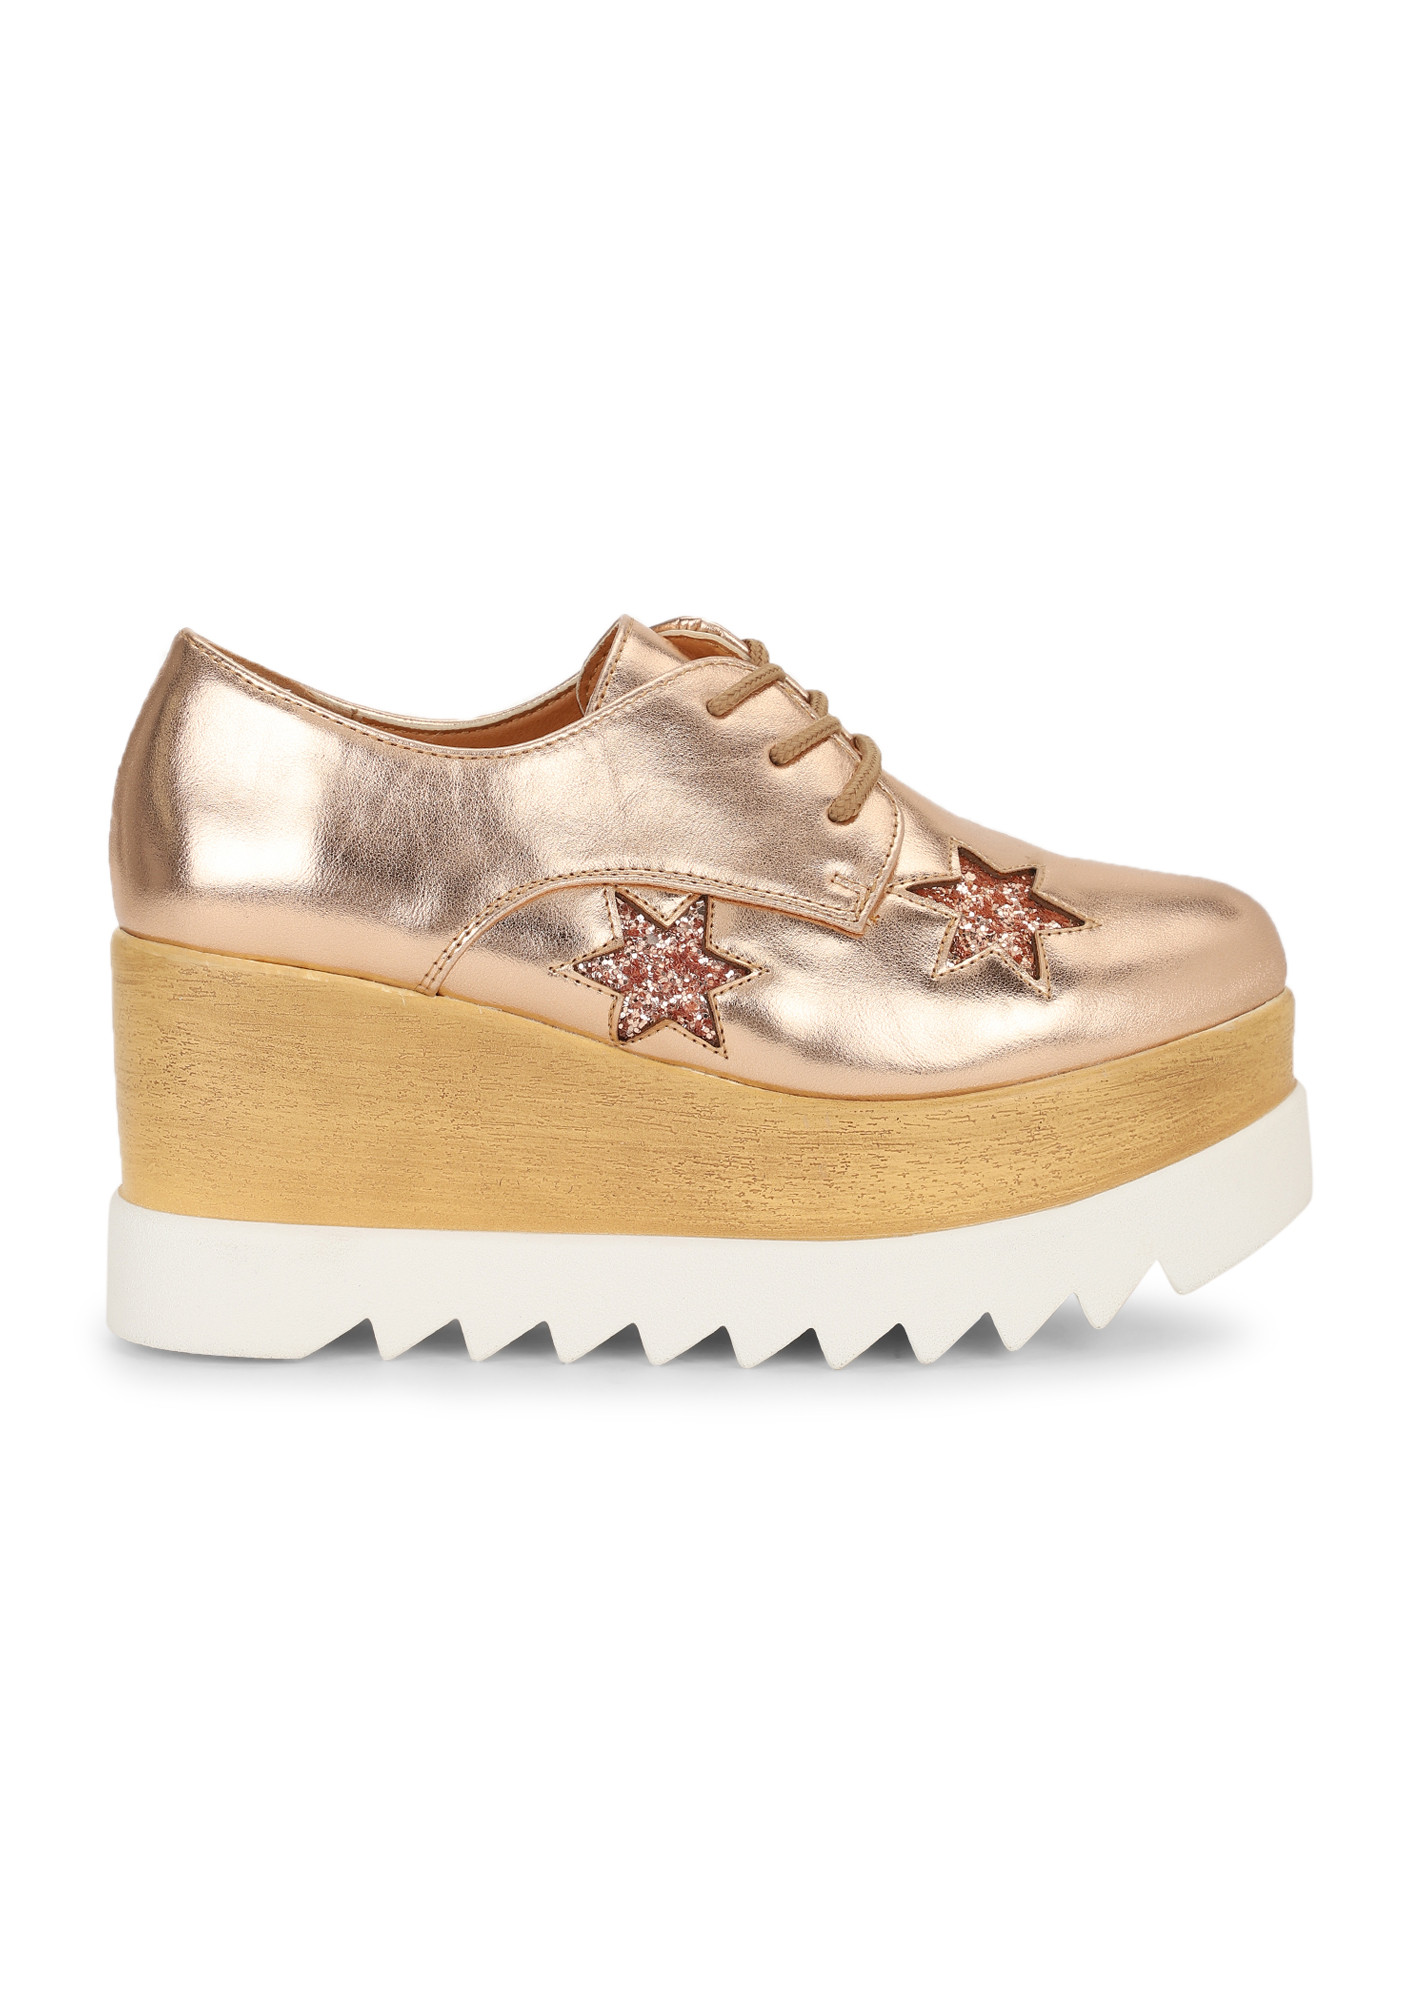 STARS TO REMEMBER ROSE GOLD HEELED SHOES